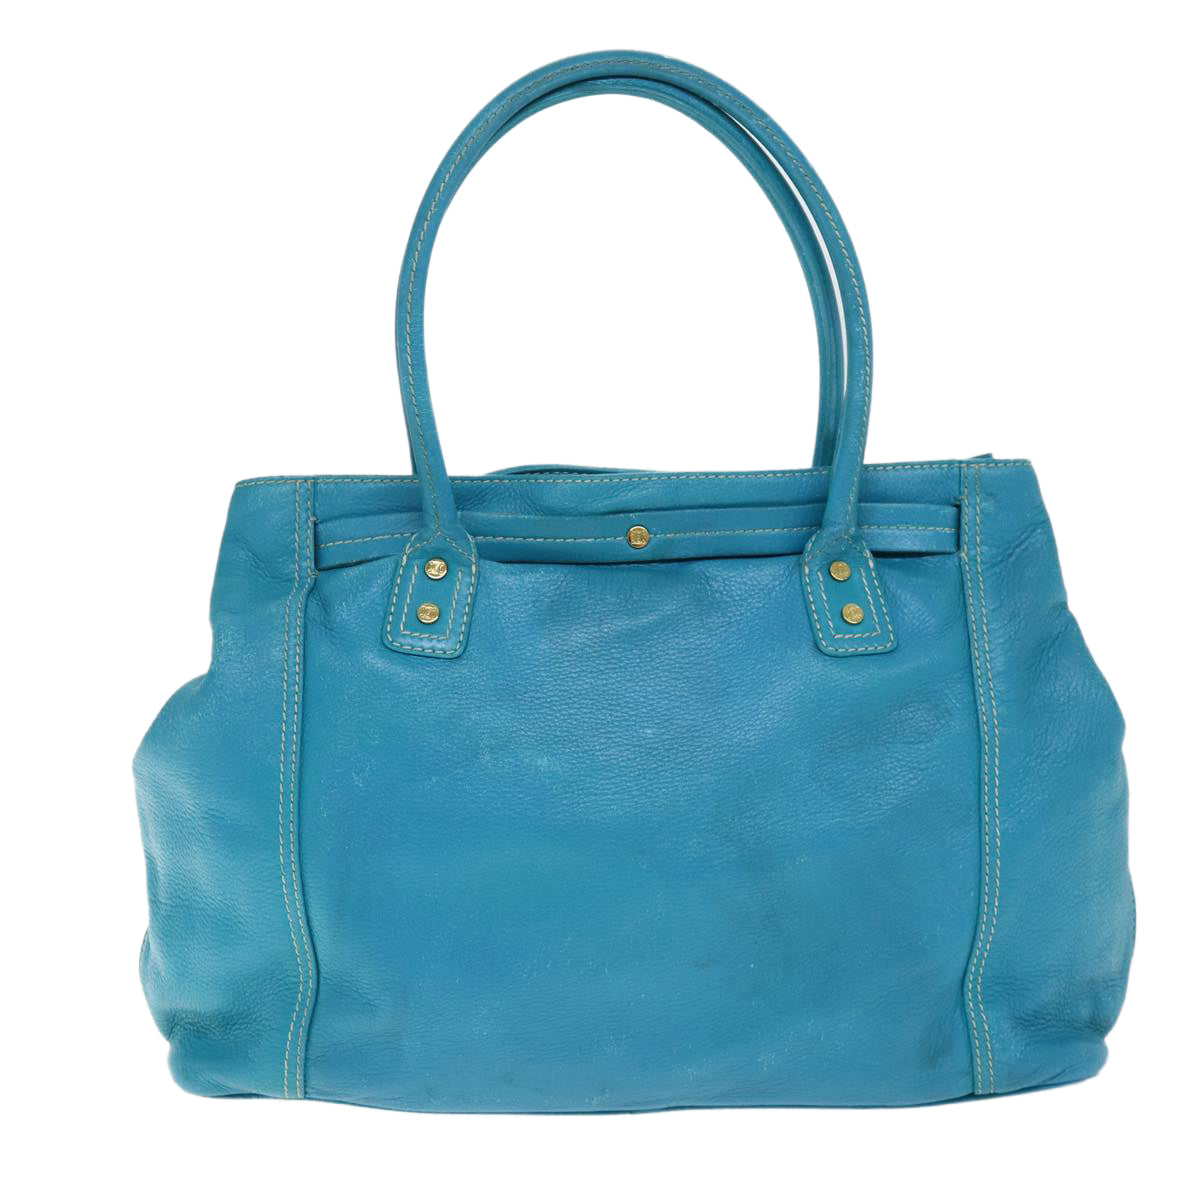 CELINE Tote Bag Leather Turquoise Blue Auth 74223 - 0